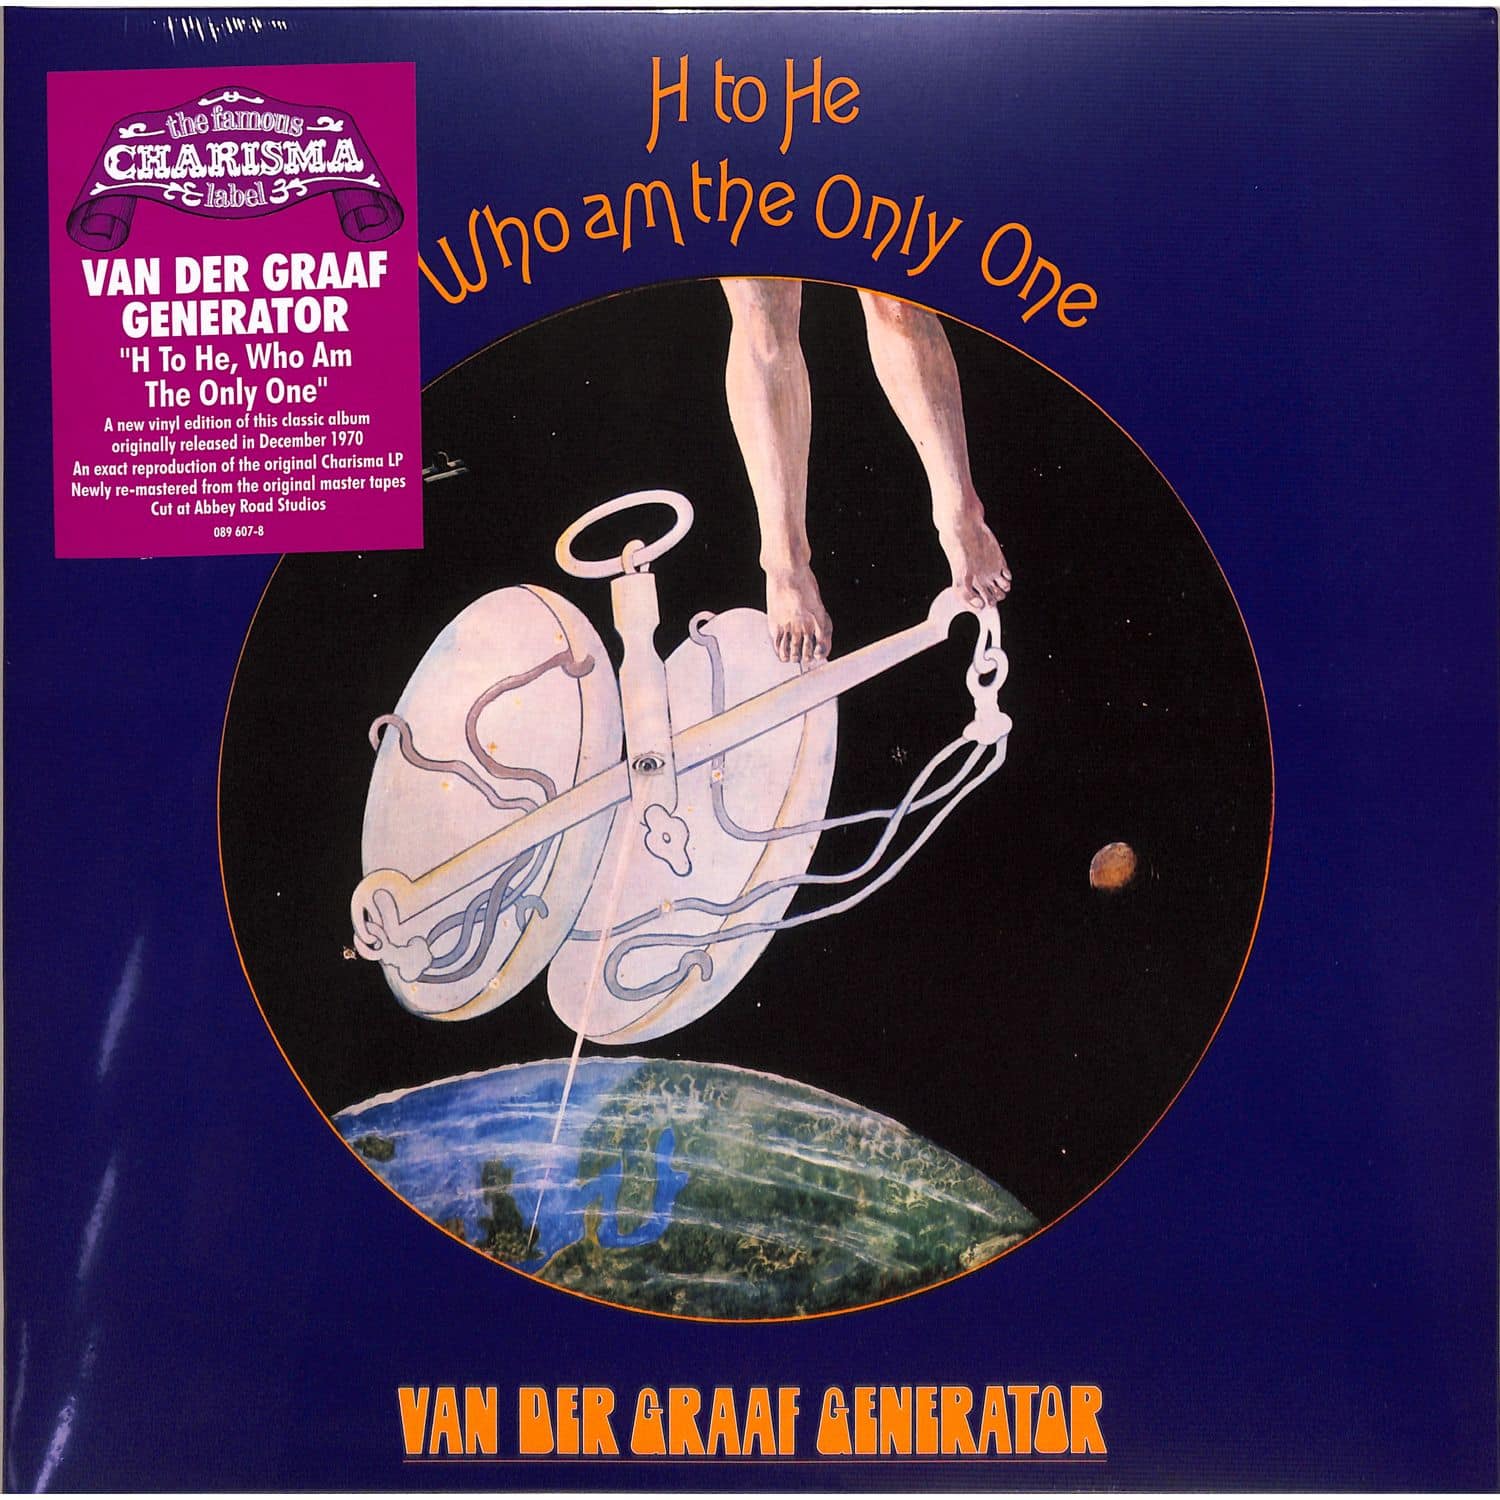 Van Der Graaf Generator - H TO HE WHO AM THE ONLY ONE 